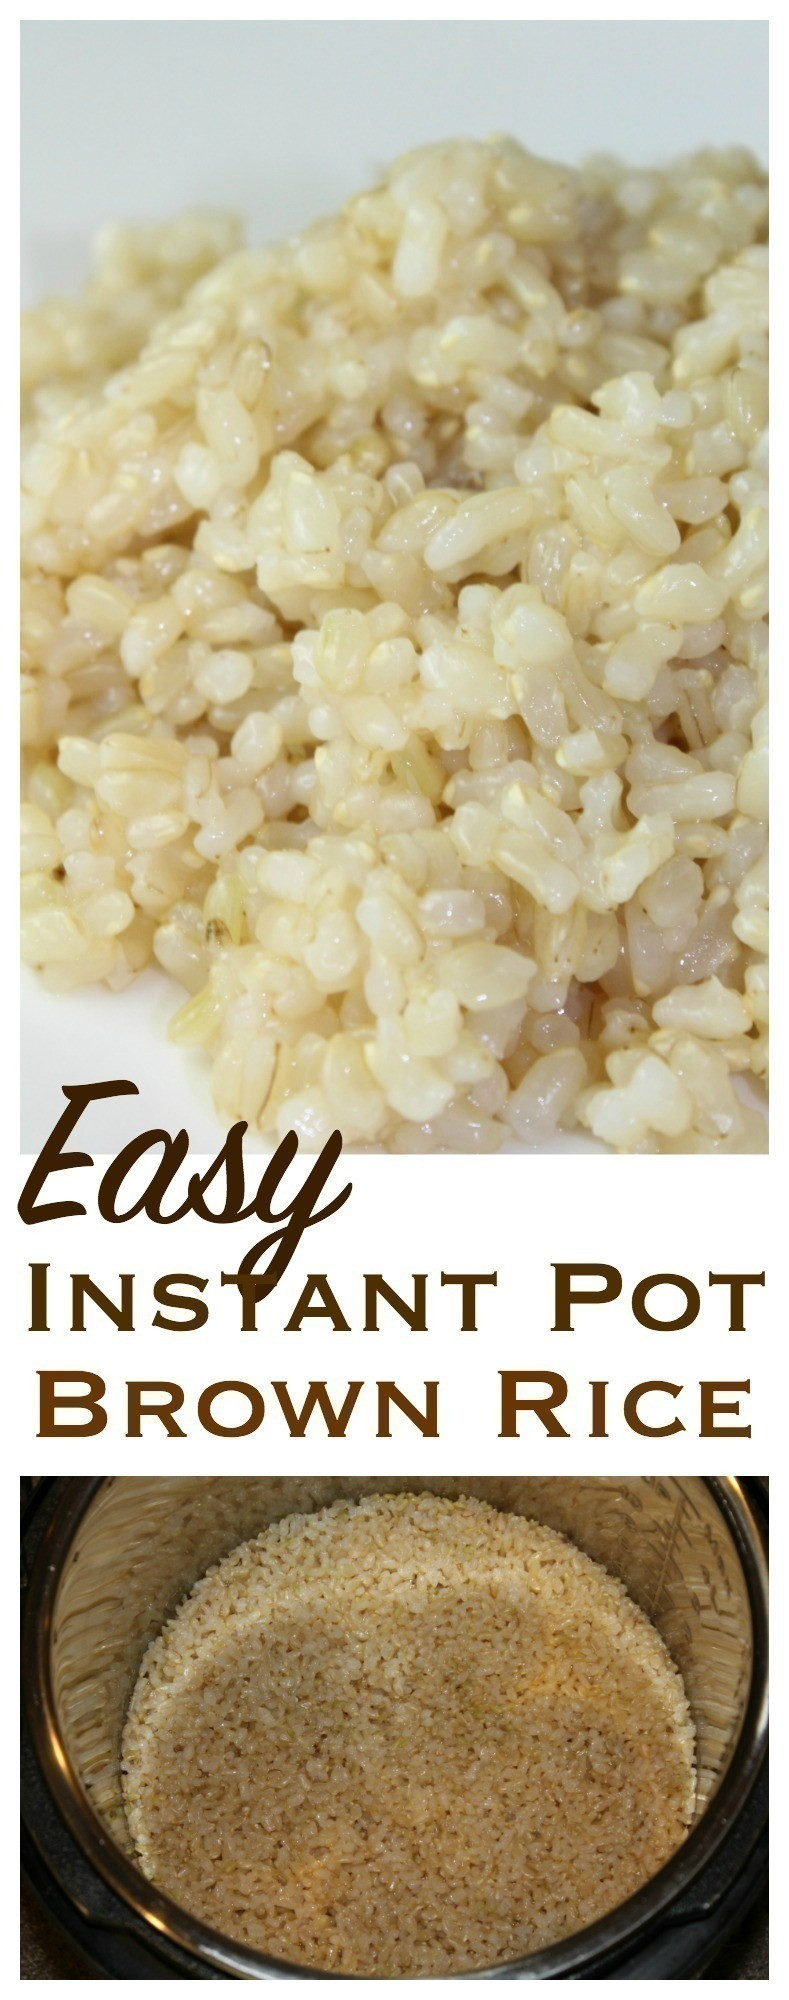 Brown Rice Instant Pot Recipe
 Easy Brown Rice in the Instant Pot